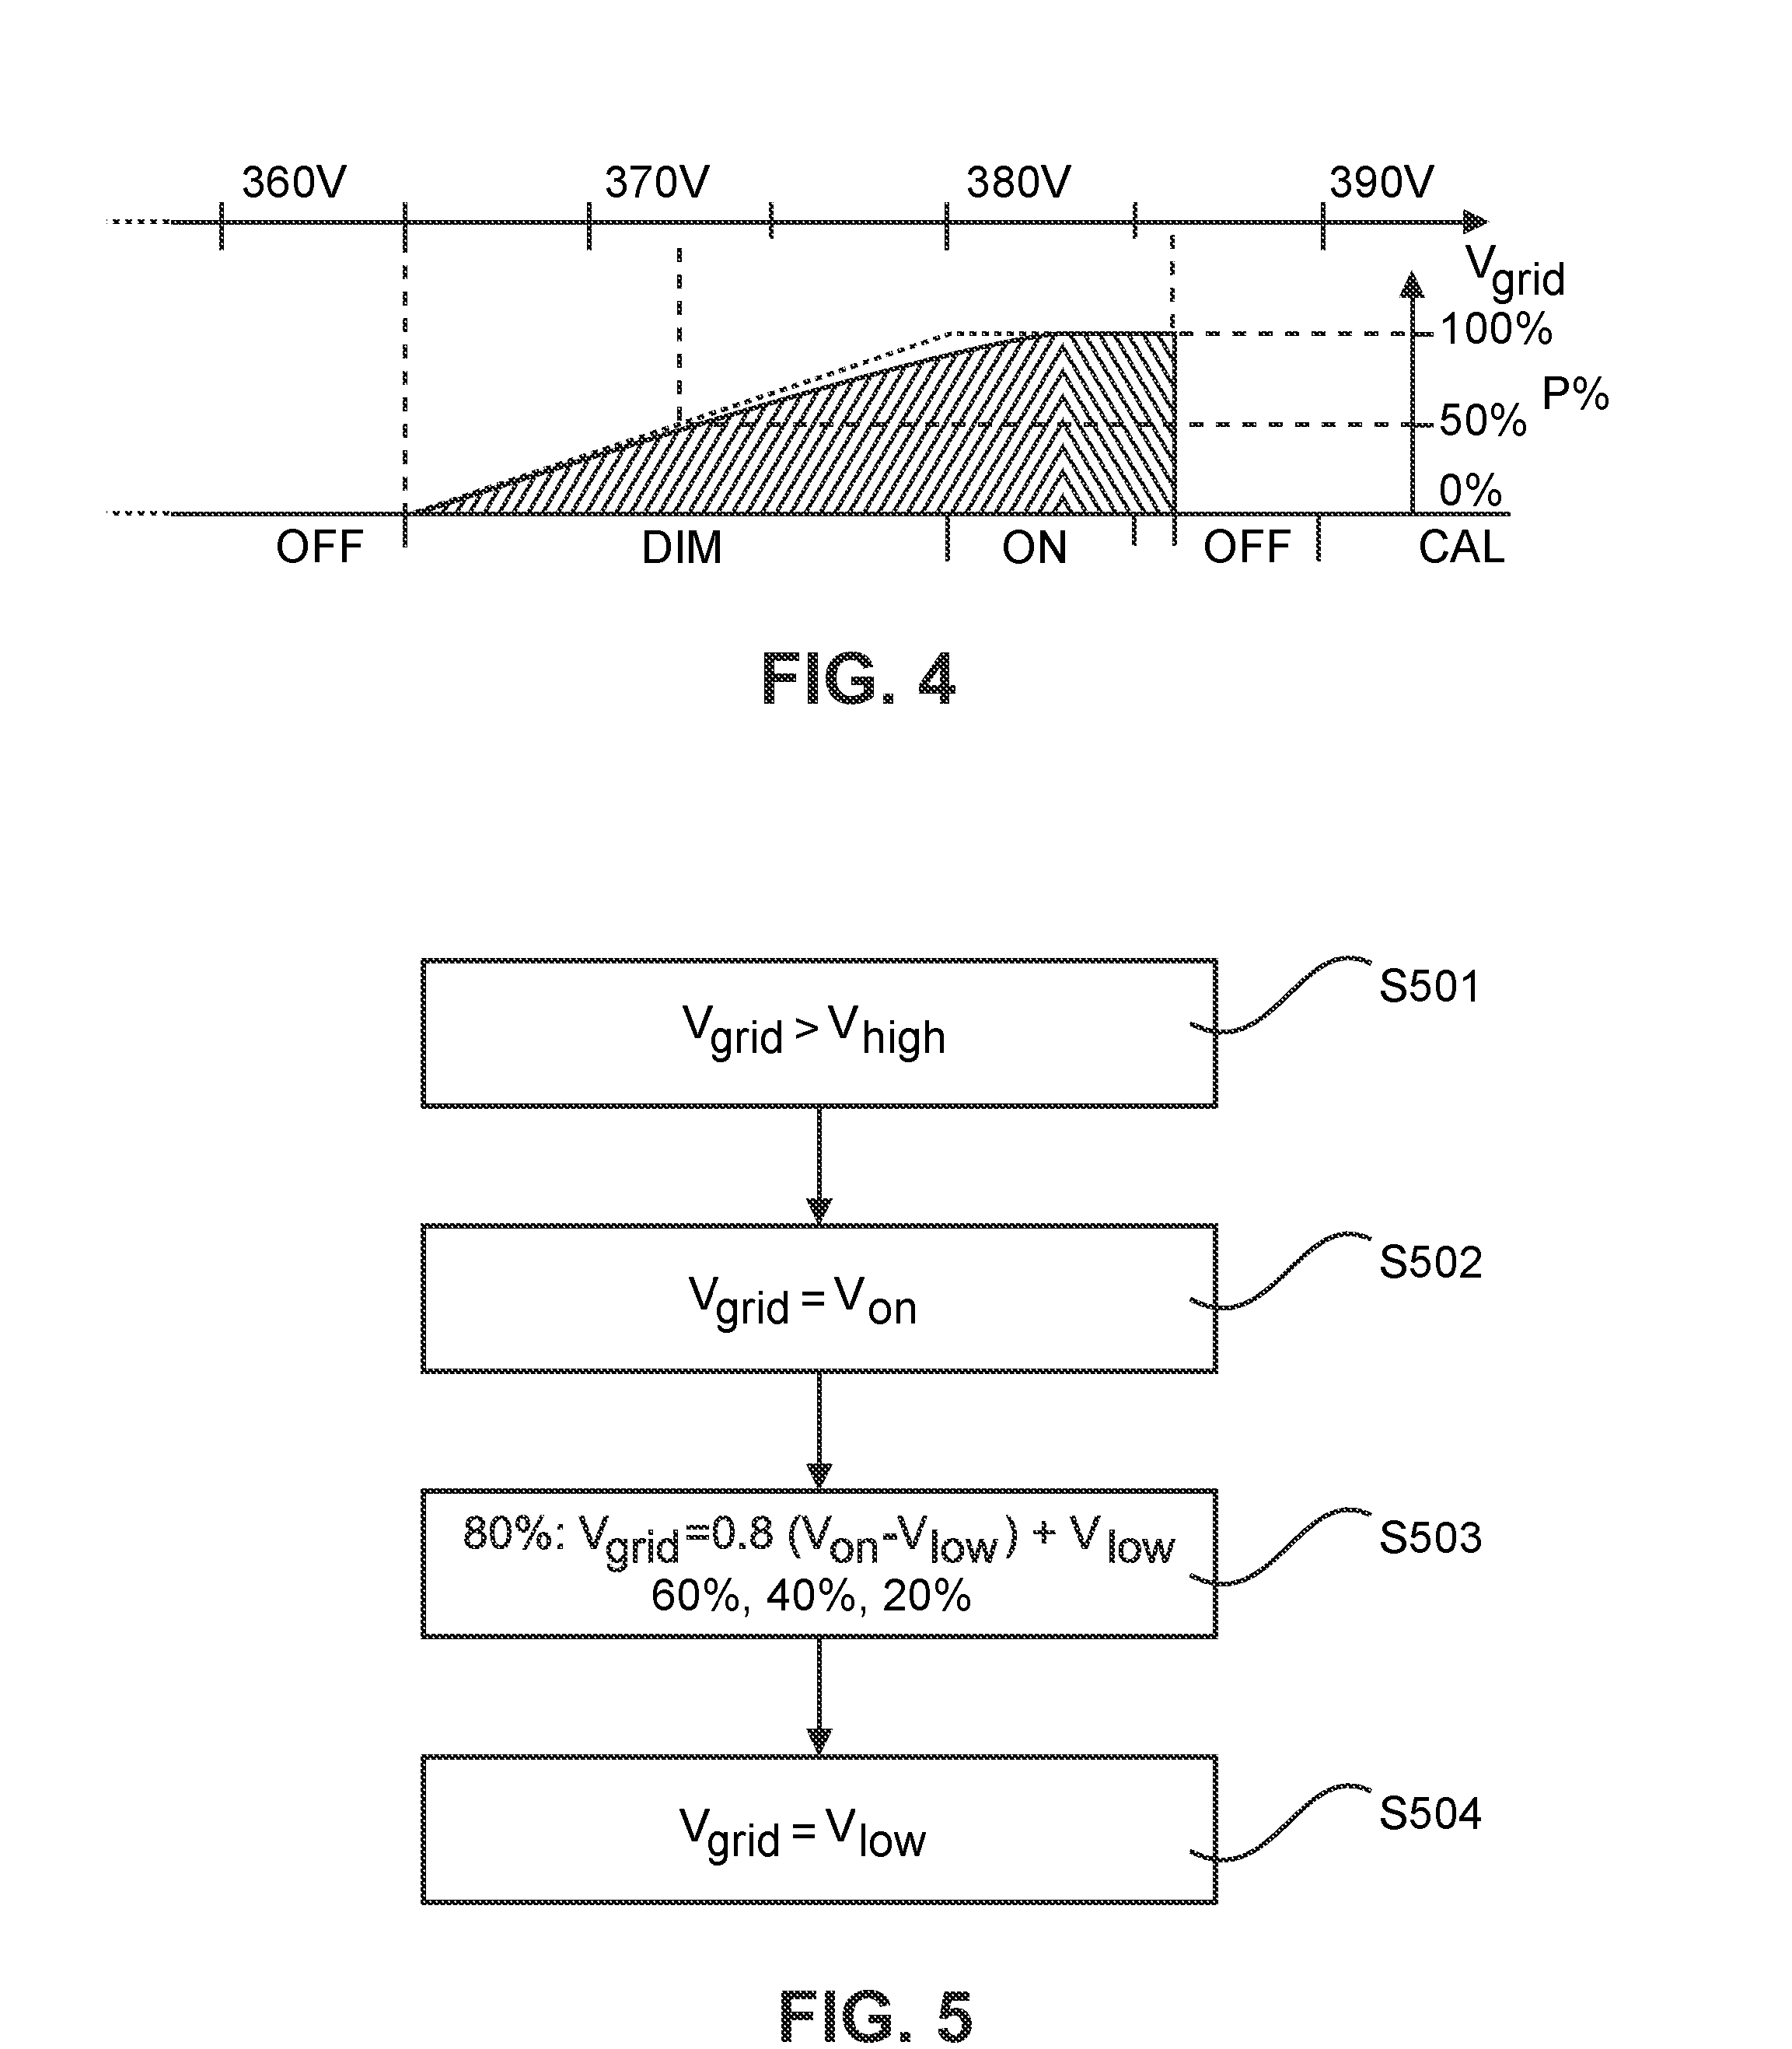 Signal-level based control of power grid load systems